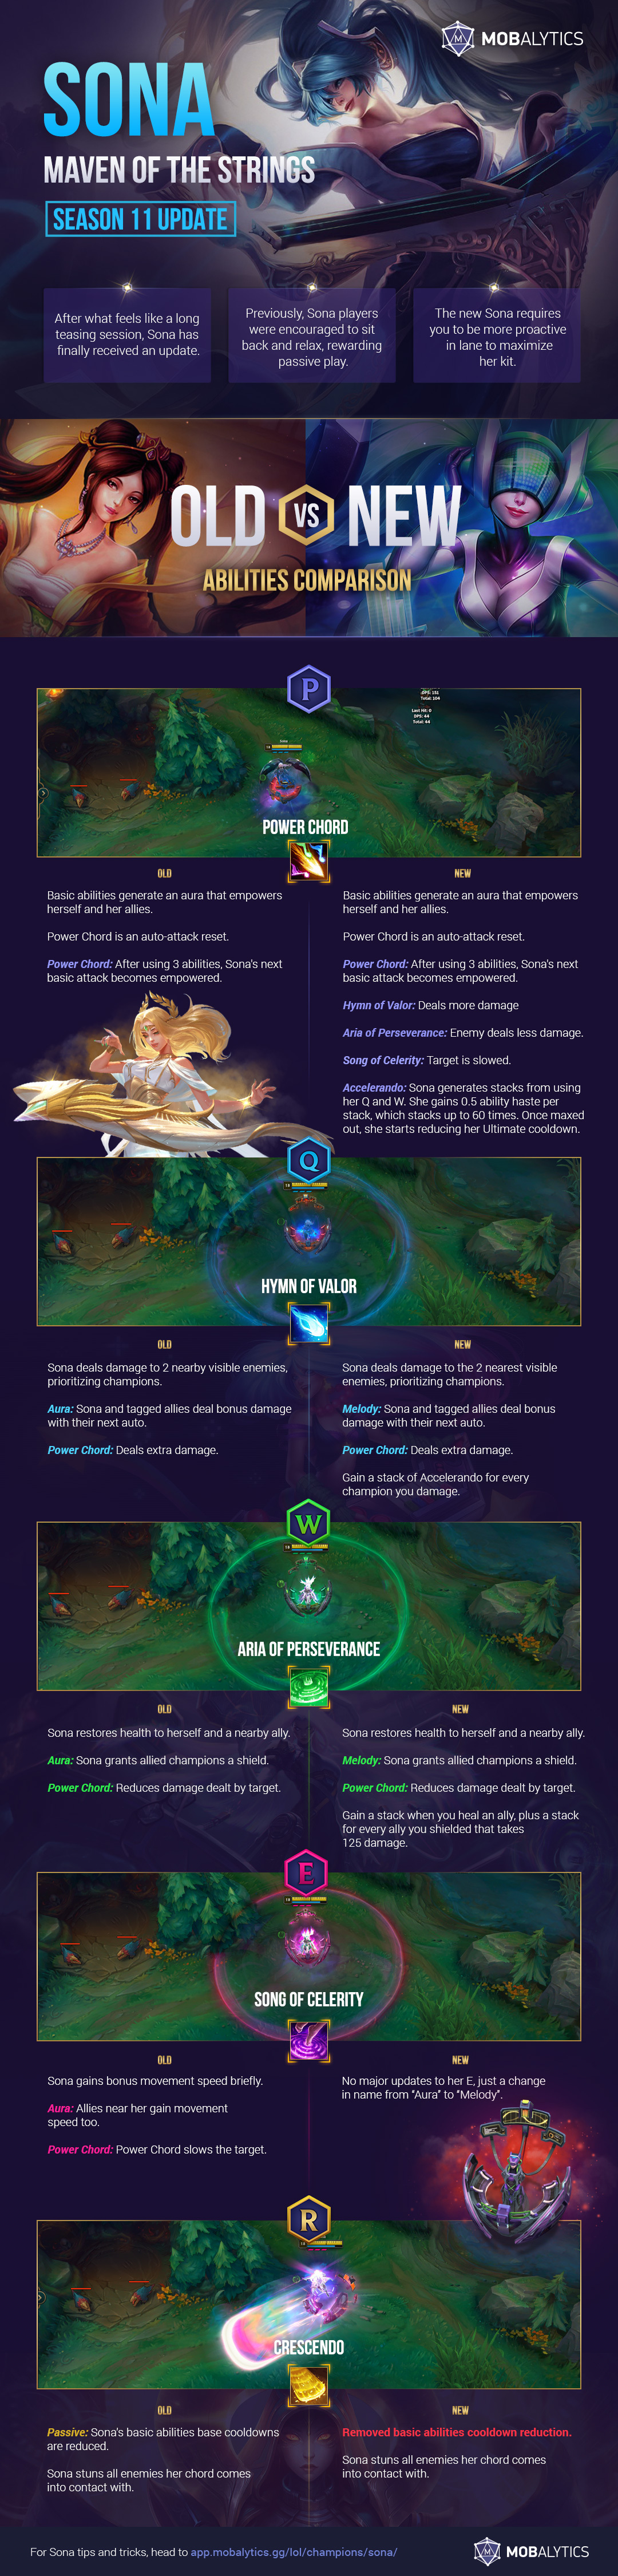 Season 11 Sona Update: Side-by-Side Ability Comparisons – Infographic